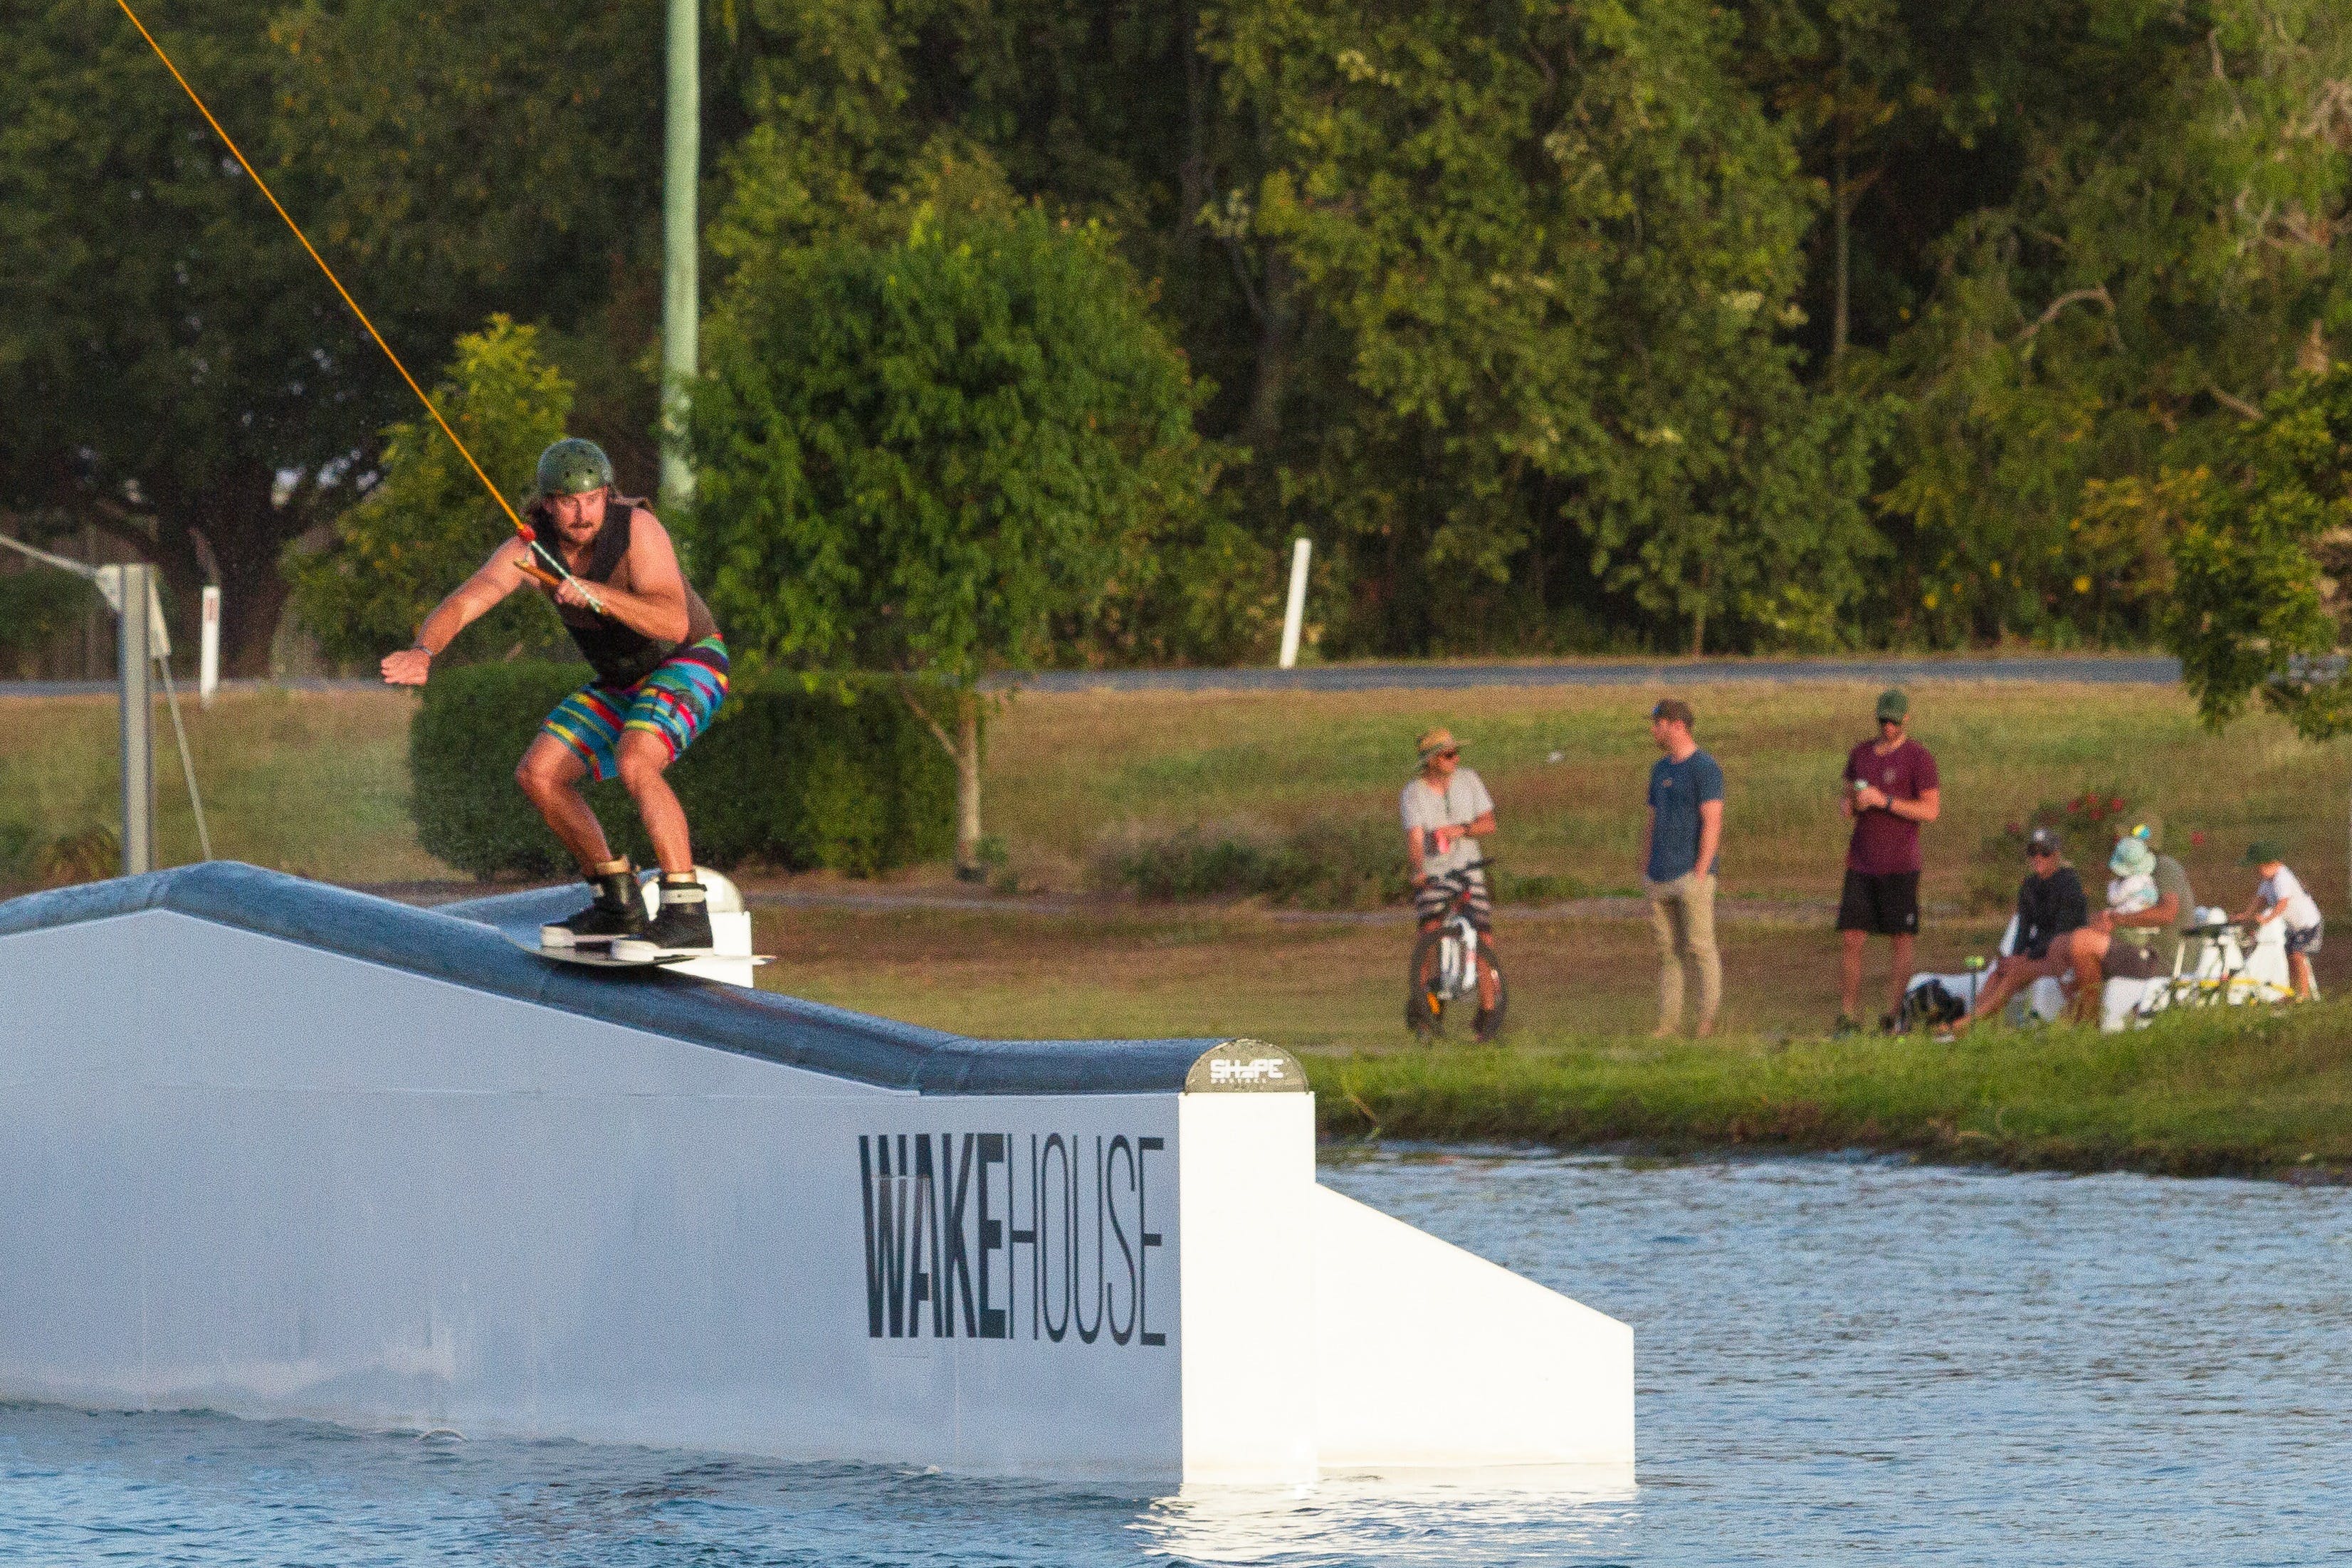 Cash for Tricks - Wakeboarding Comp - WA Accommodation